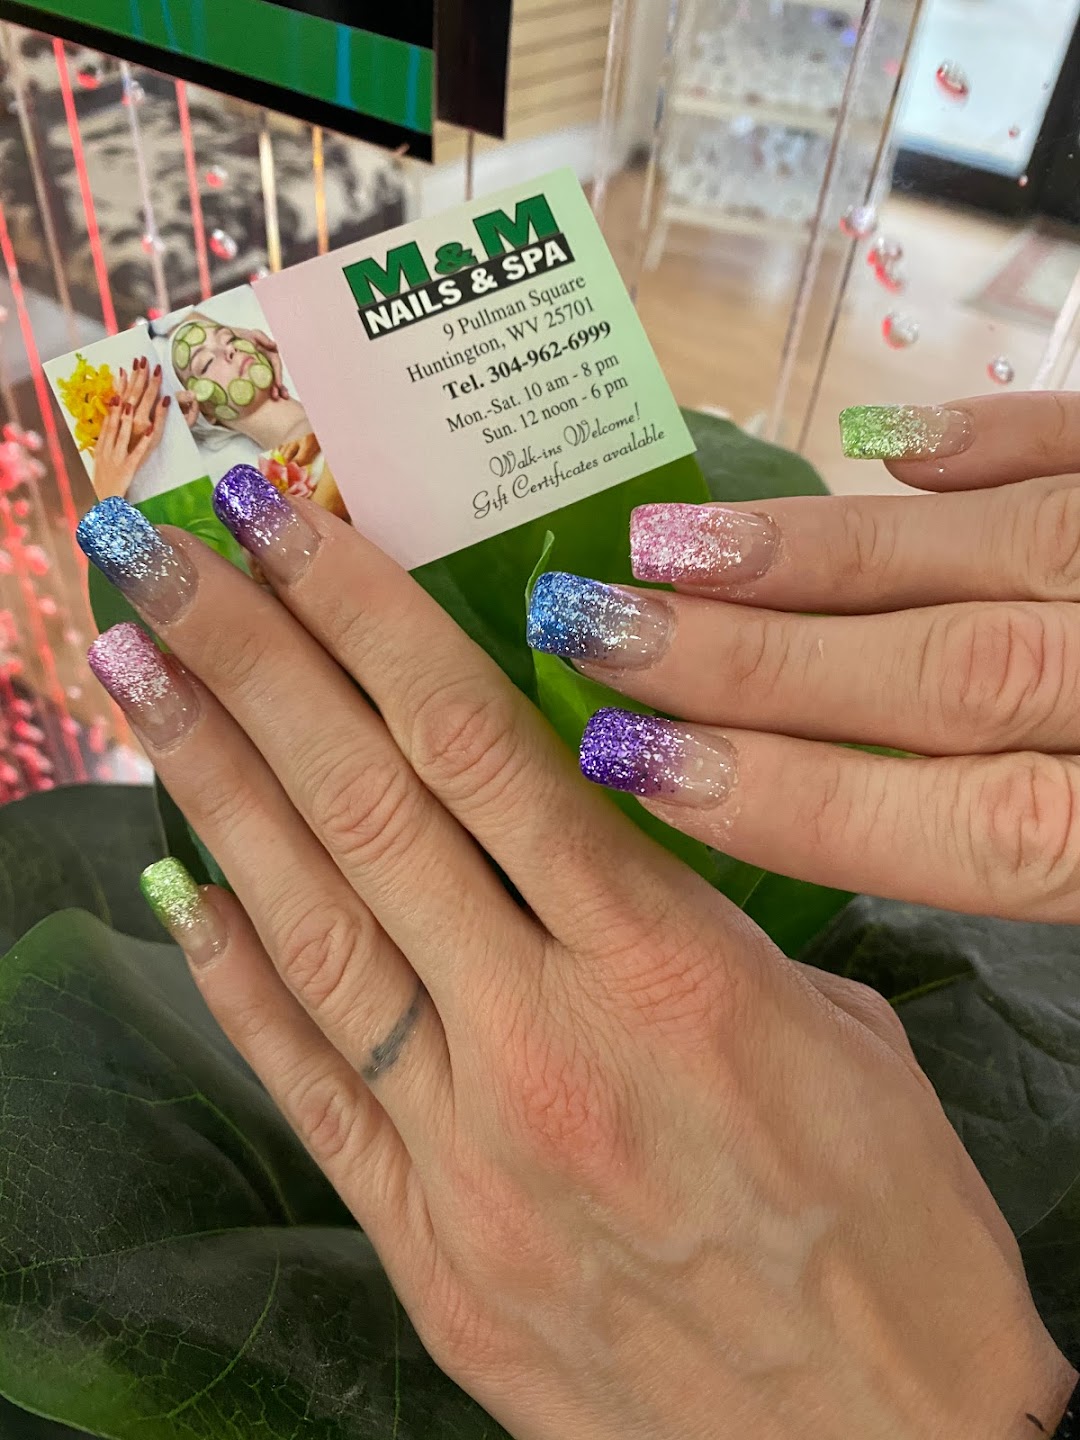 M & M nails and Spa